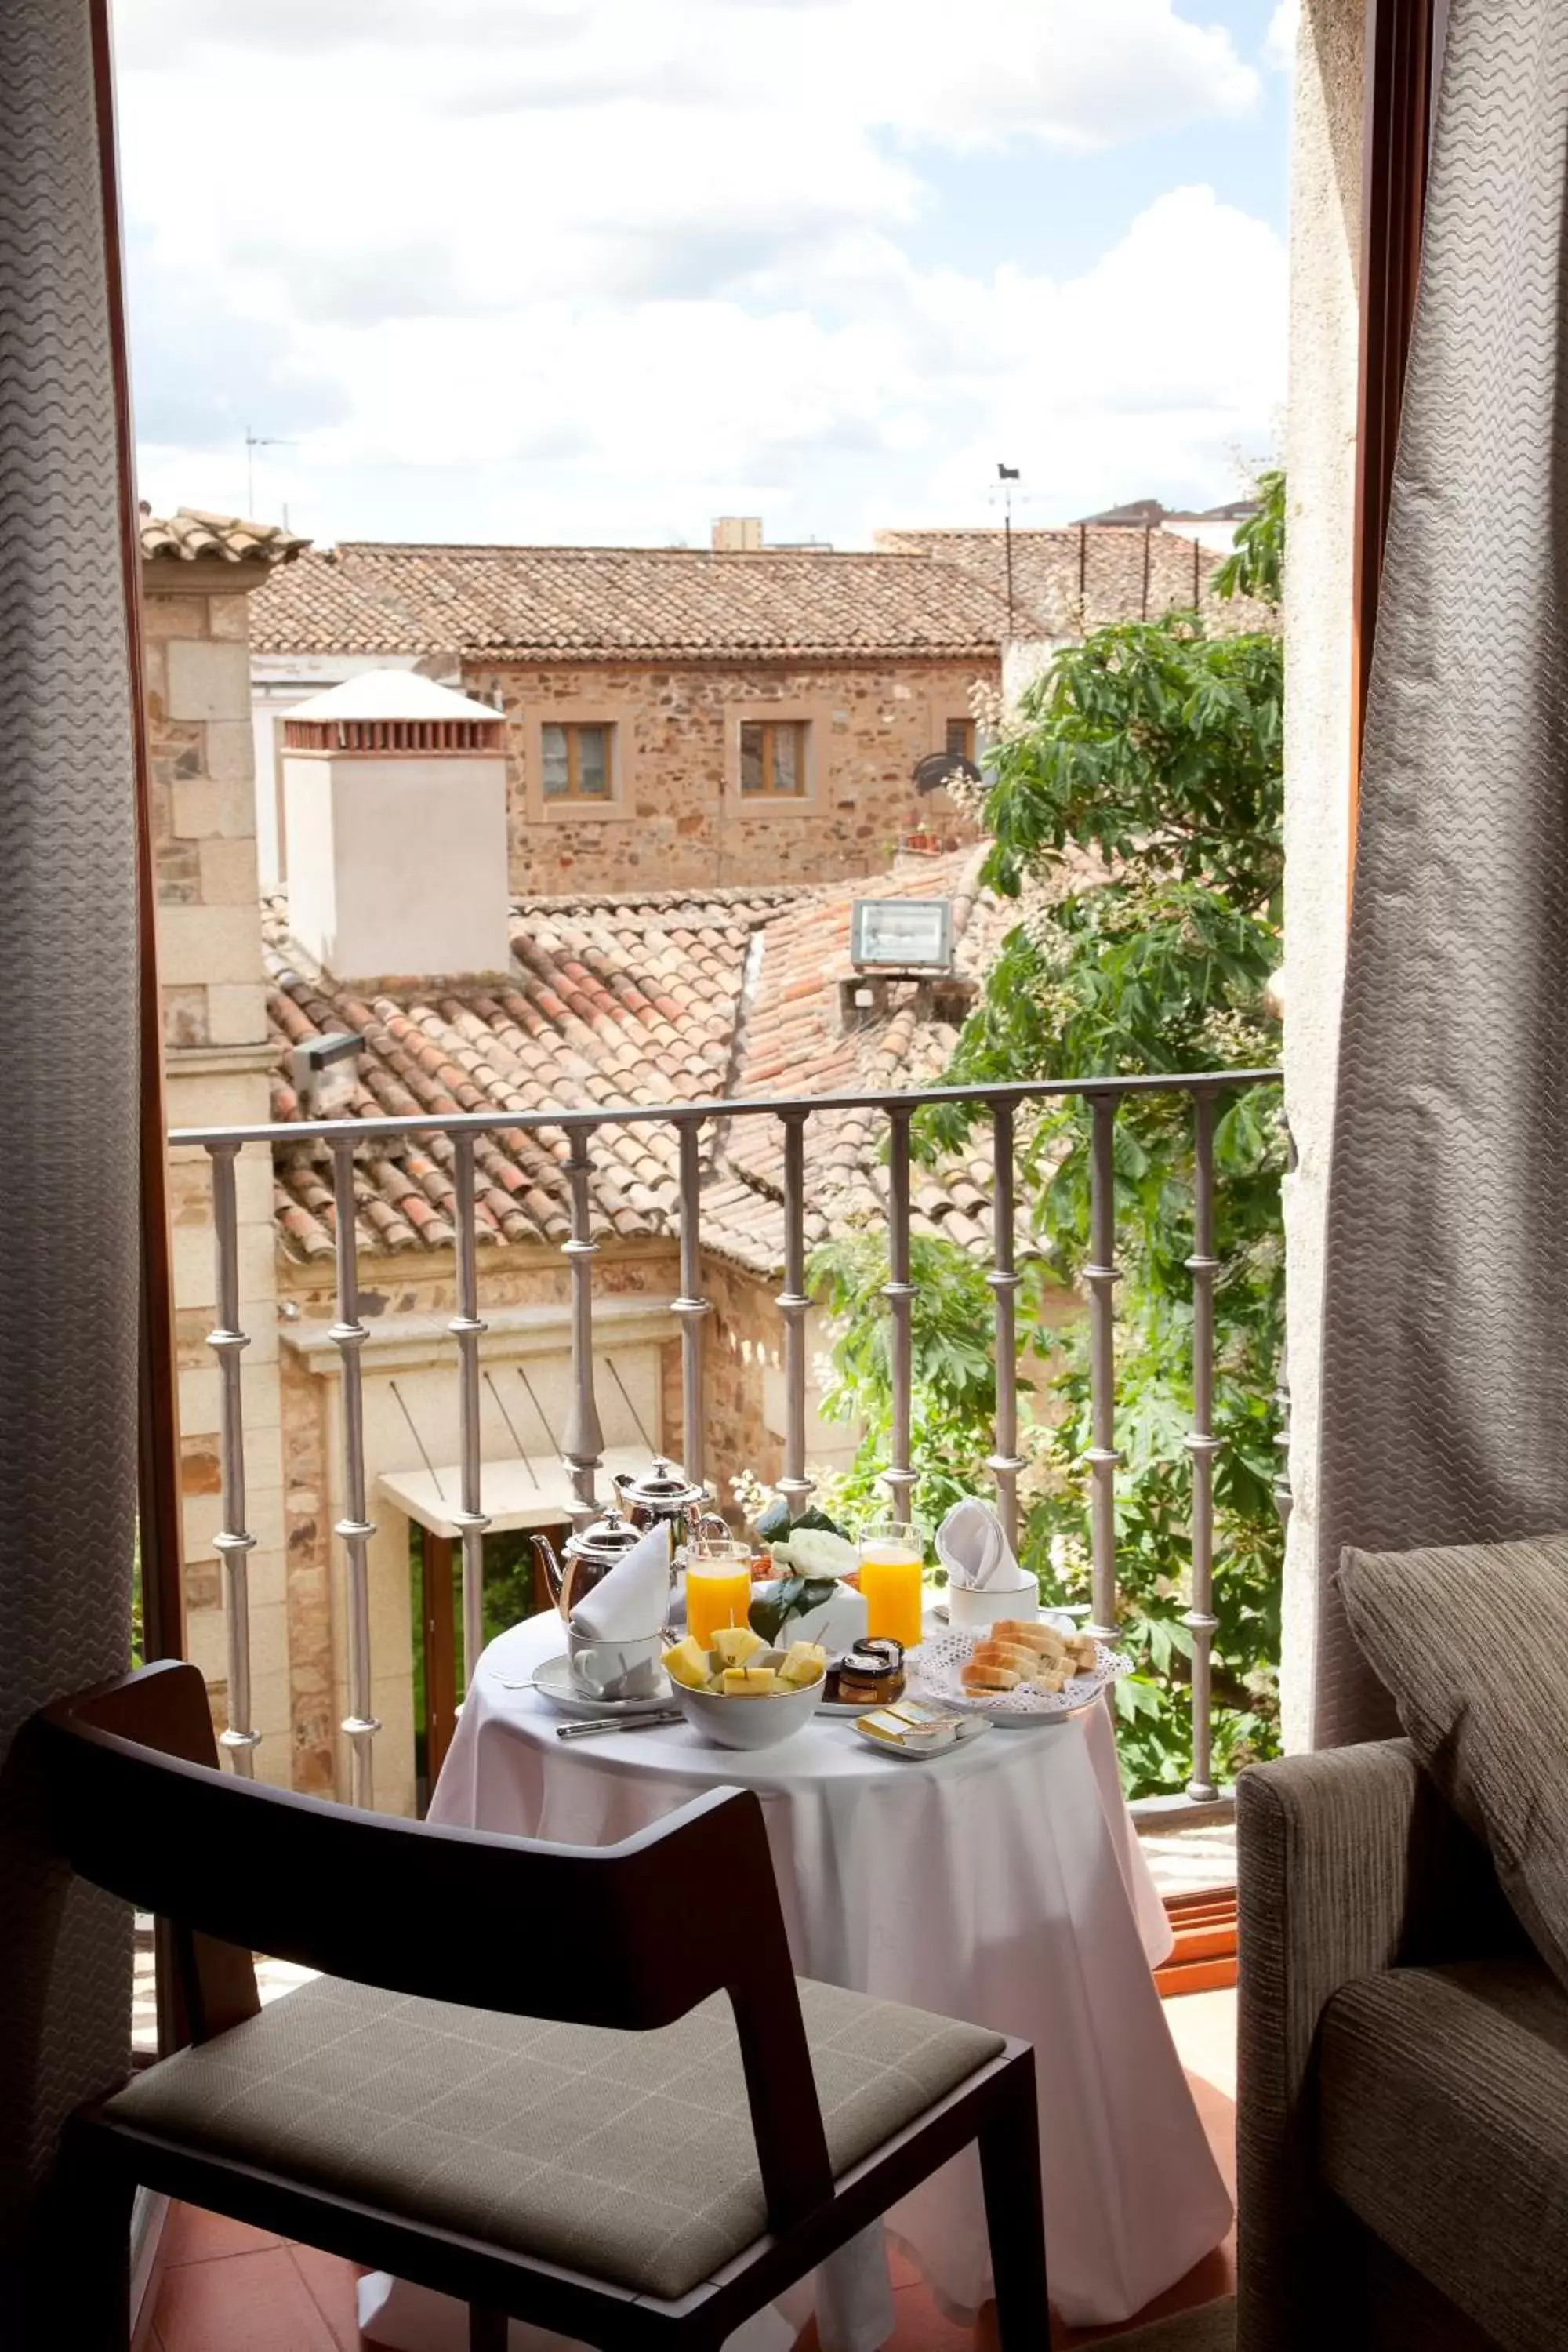 View (from property/room) in Parador de Caceres